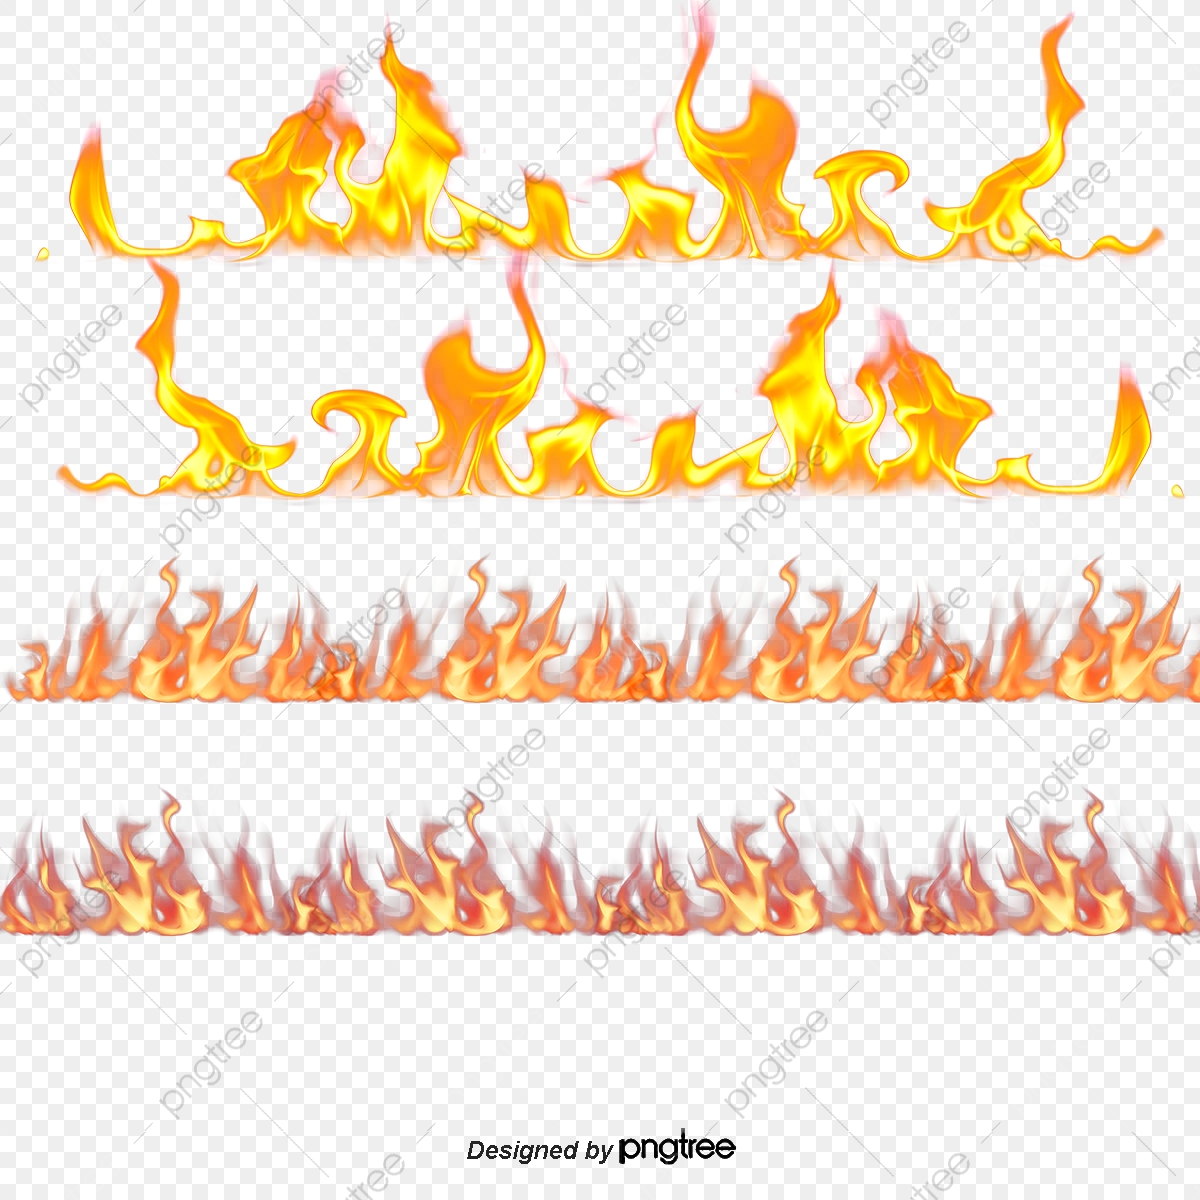 flame clipart file